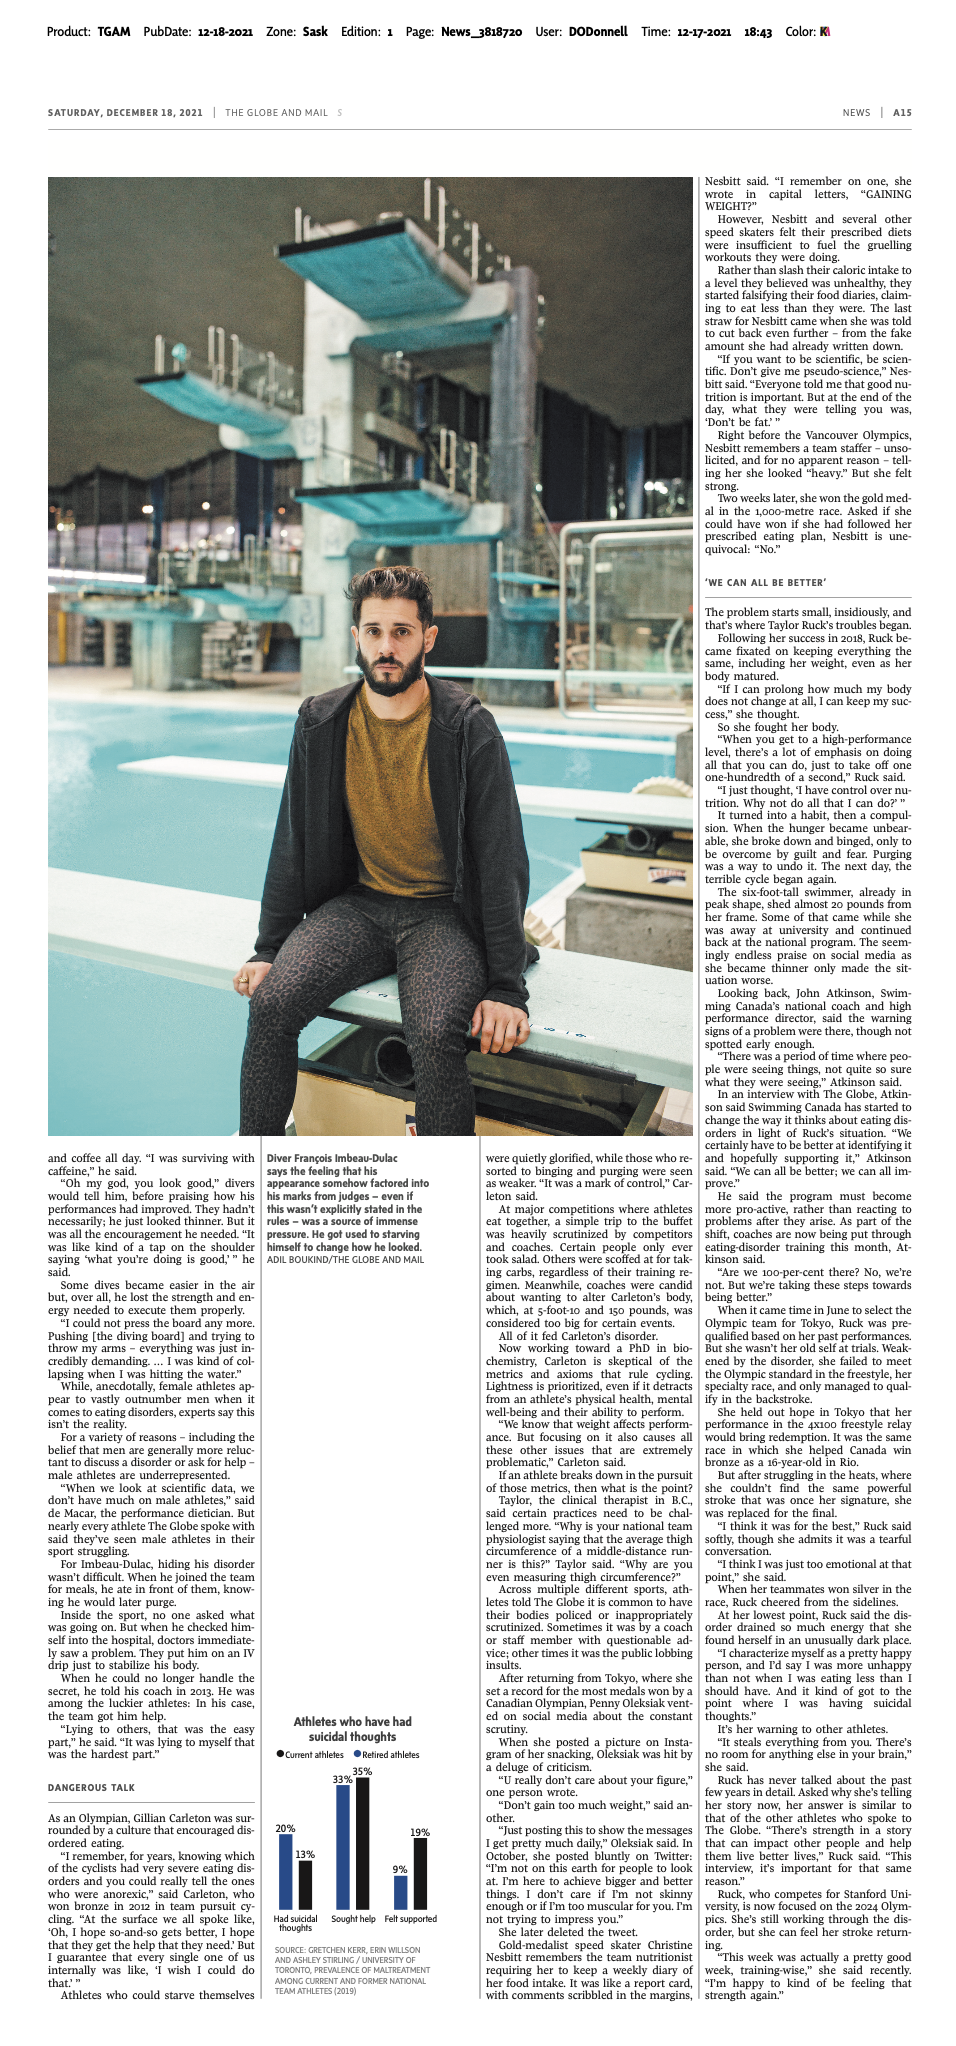 The Globe and Mail: a Portrait of Olympic Diver